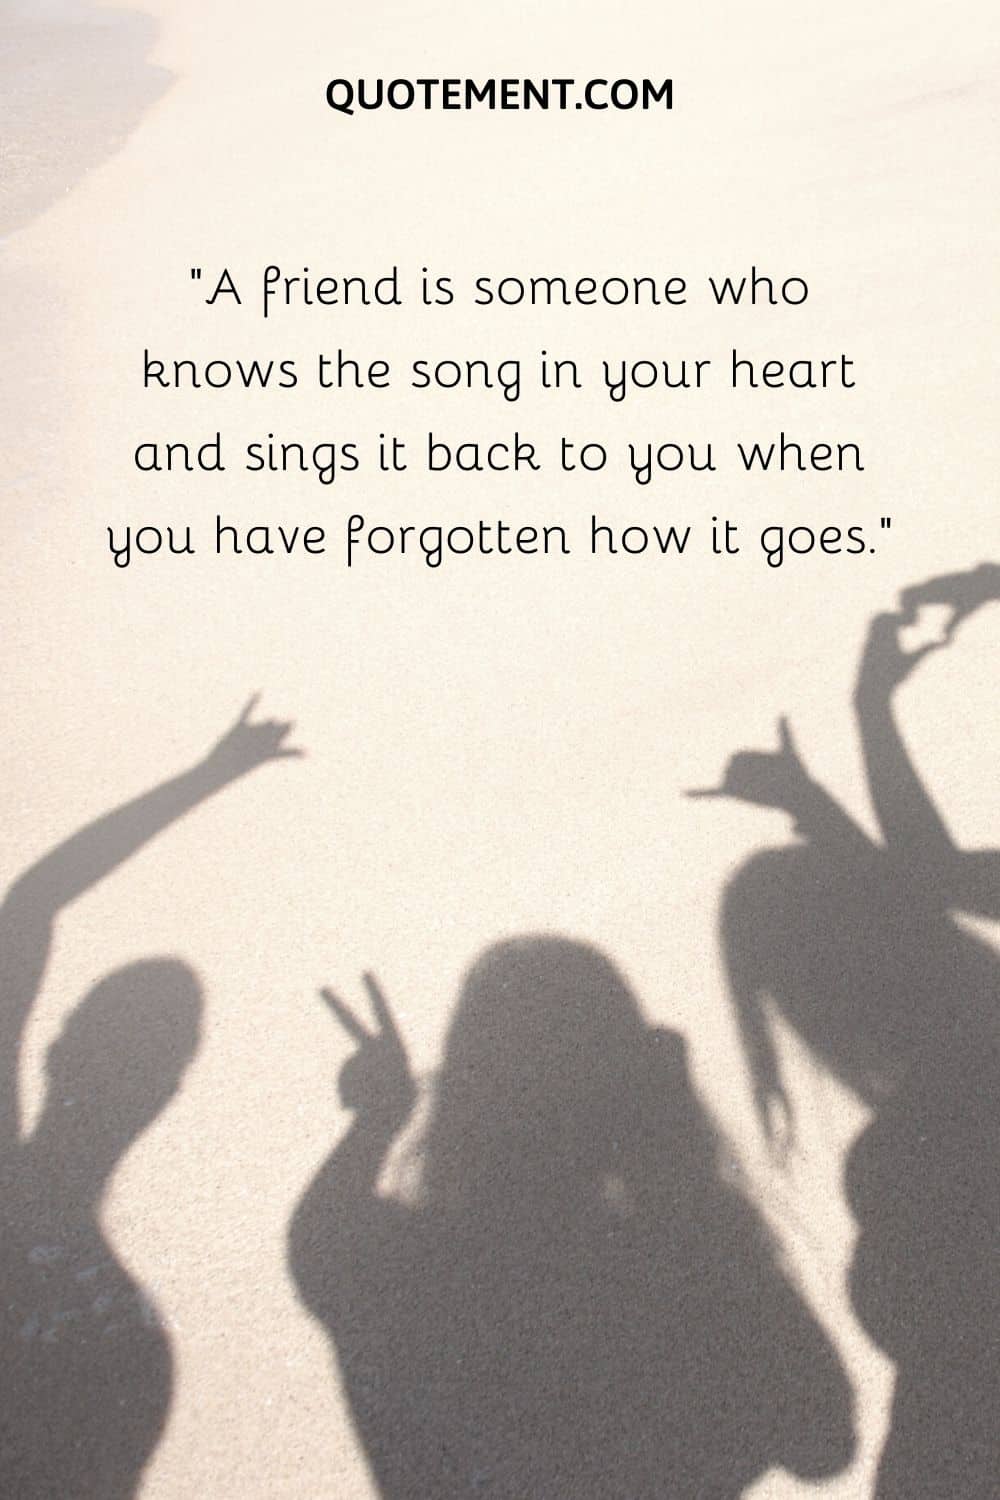 A friend is someone who knows the song in your heart and sings it back to you when you have forgotten how it goes